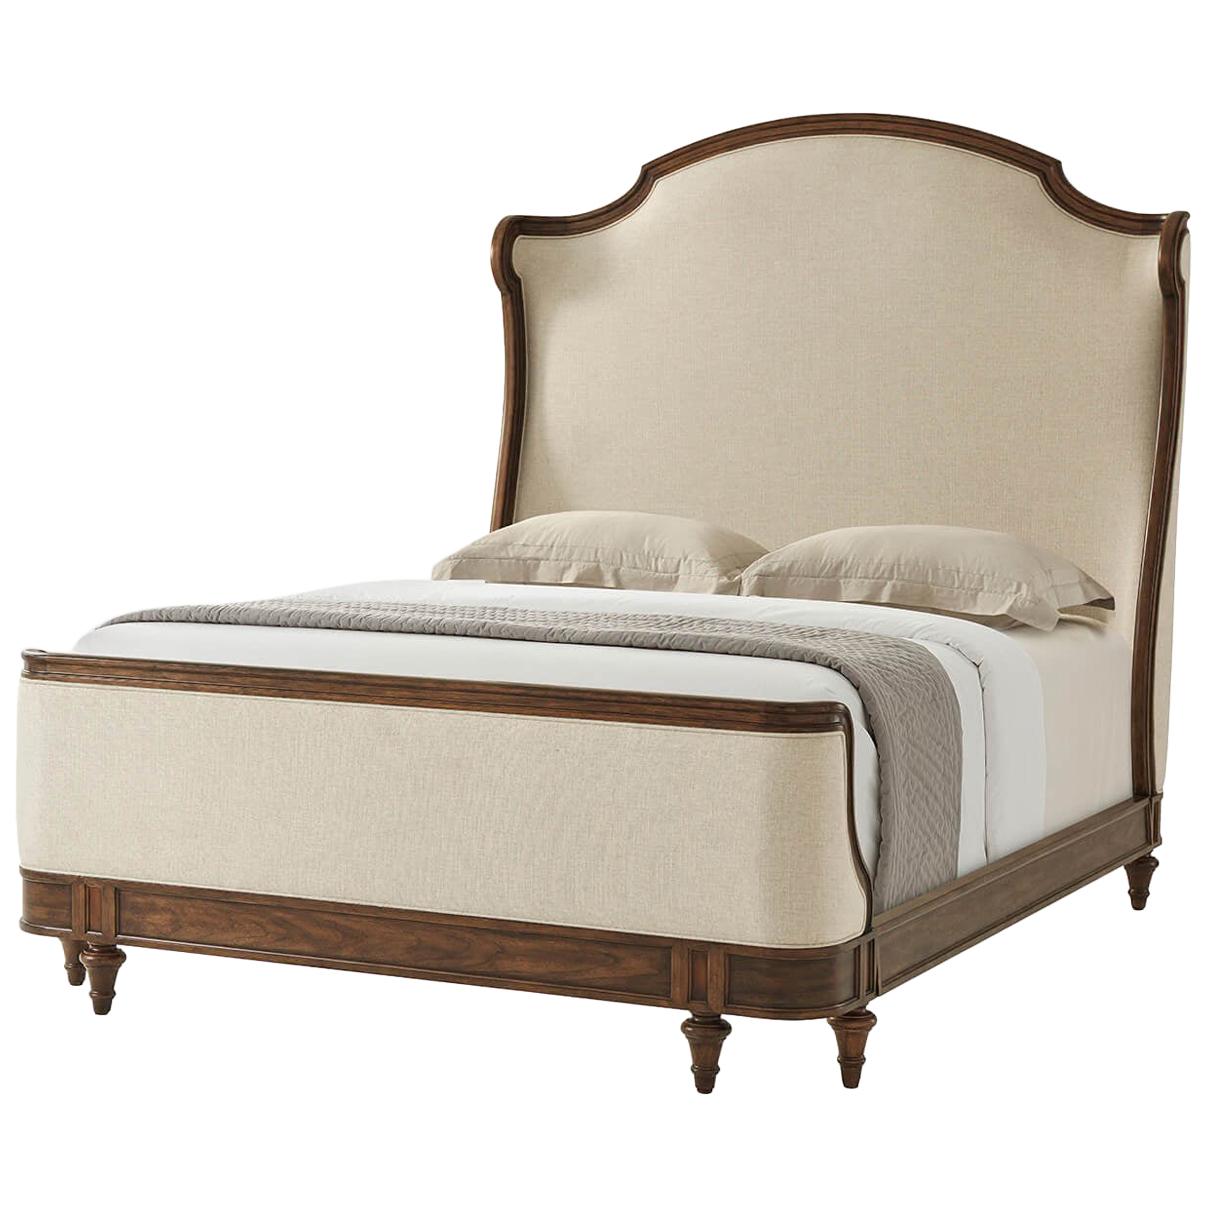 Provincial Carved Queen Size Bed For Sale